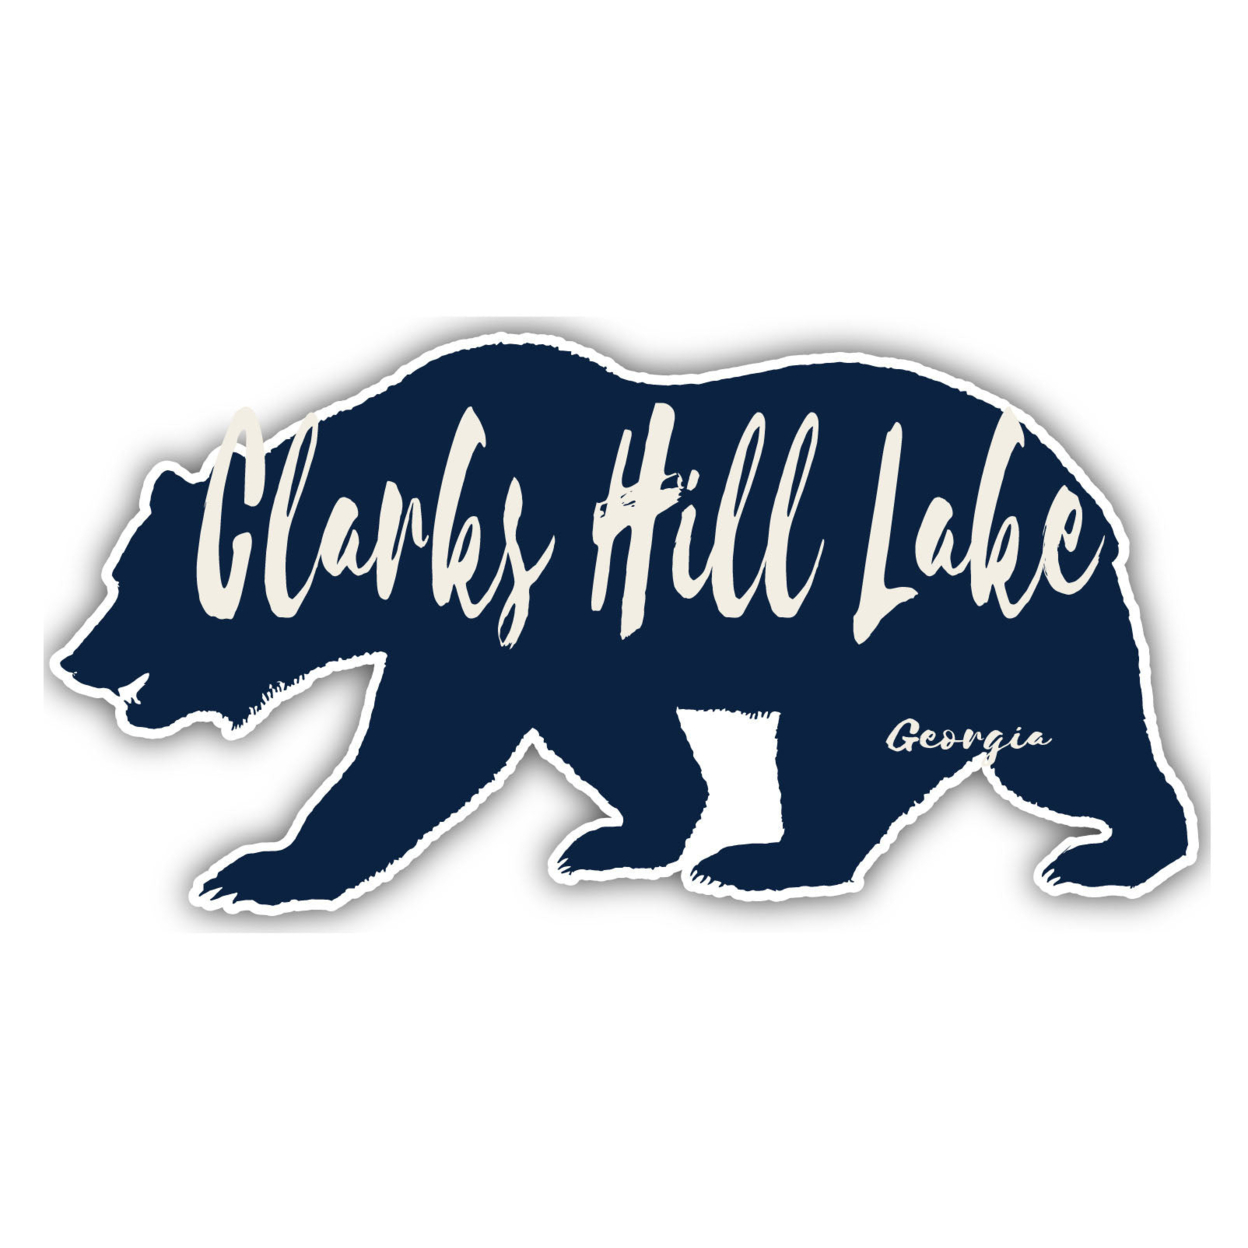 Clarks Hill Lake Georgia Souvenir Decorative Stickers (Choose Theme And Size) - 4-Pack, 2-Inch, Tent